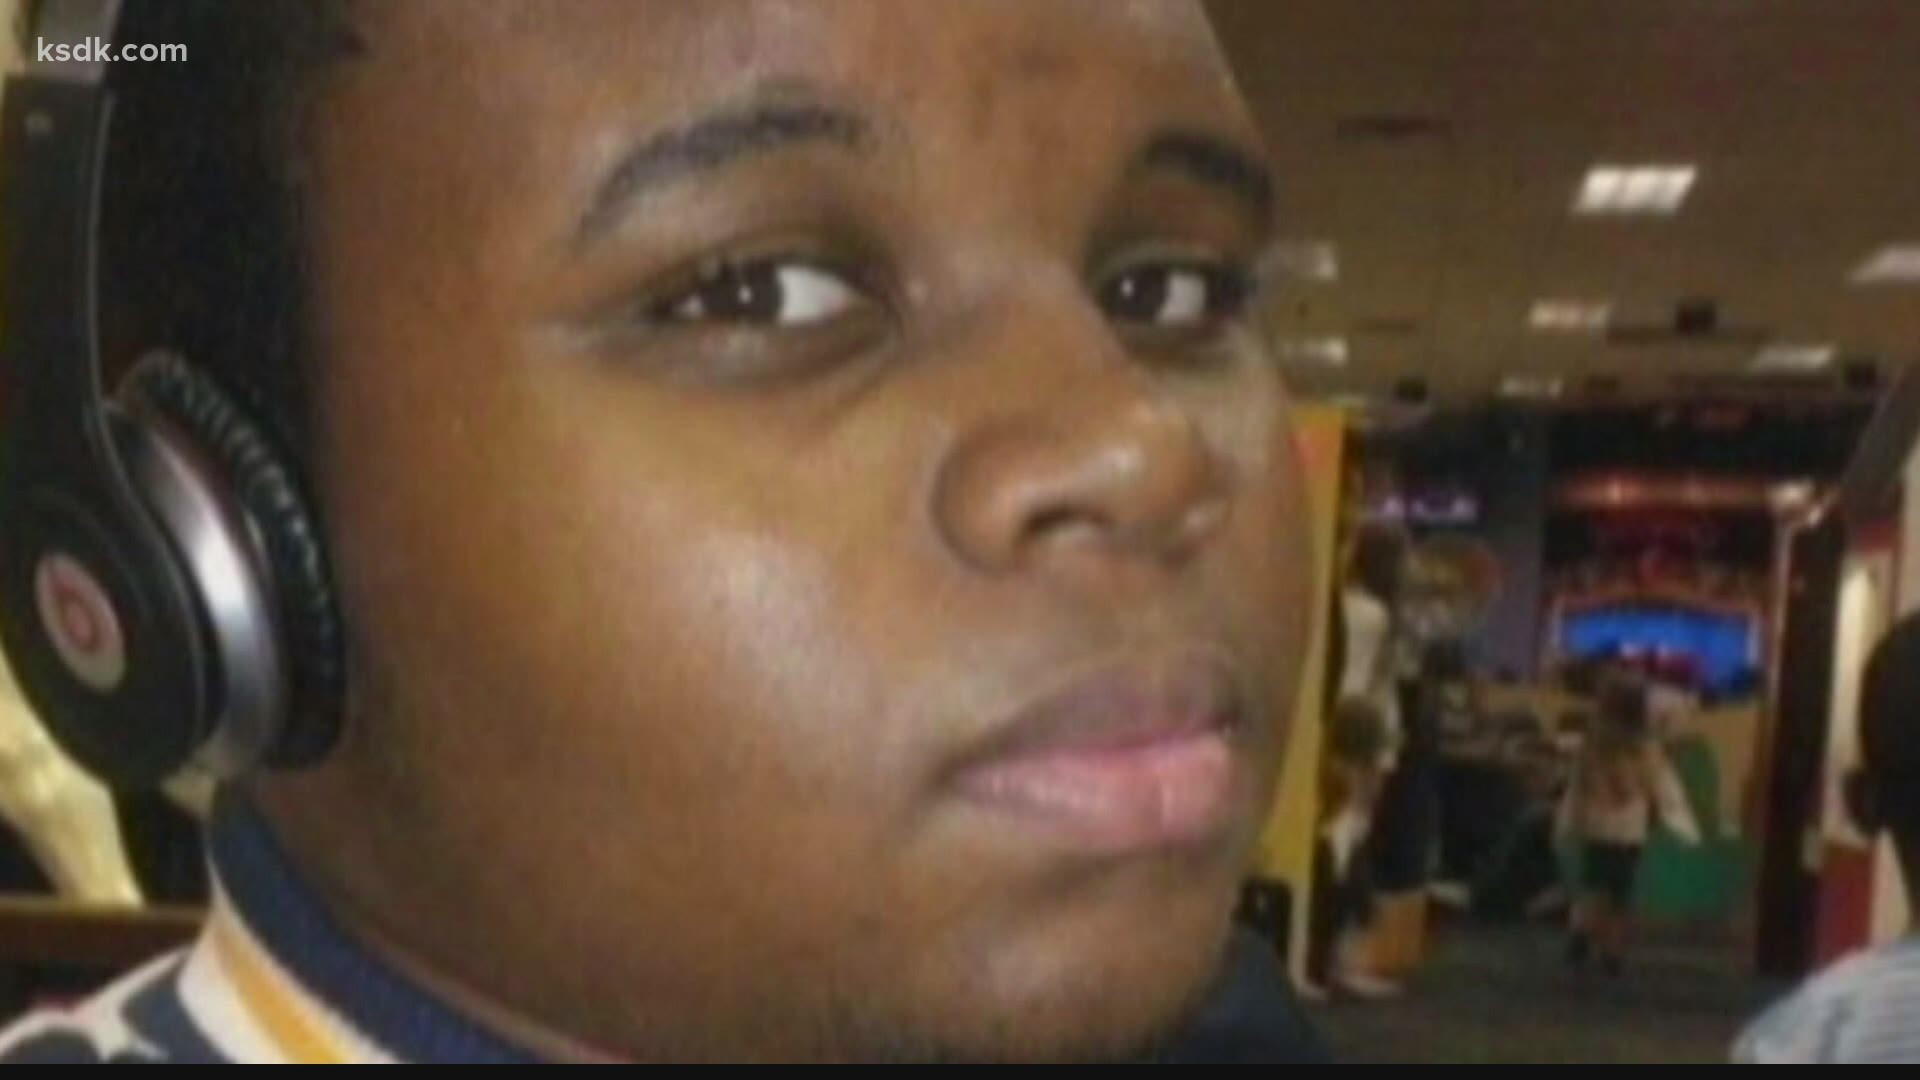 Former Ferguson Police Officer Darren Wilson will not be charged with the murder of Michael Brown , according to Wesley Bell